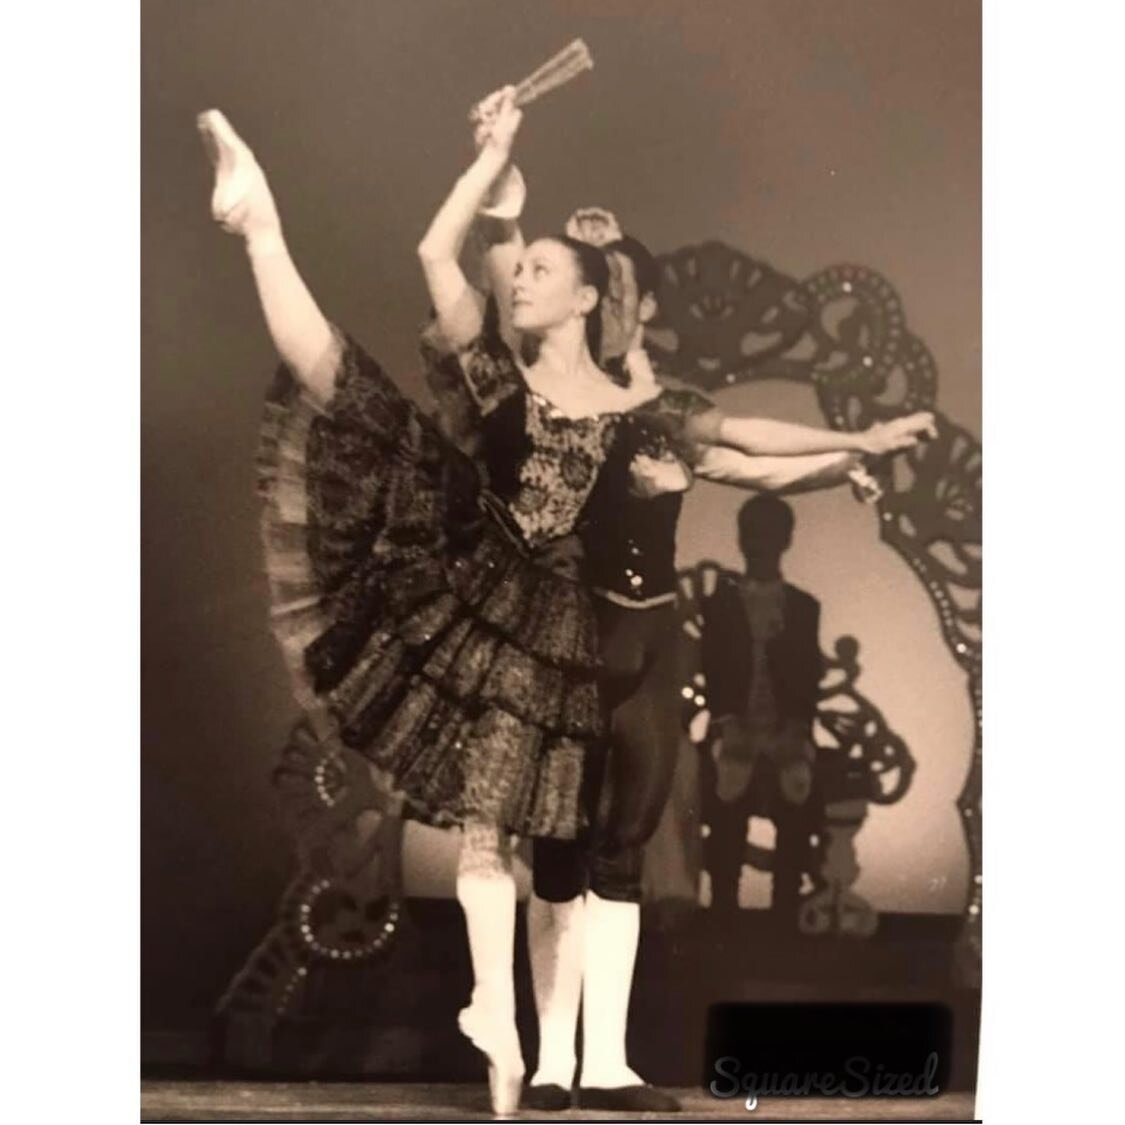 @westsideballet_ 49th Nutcracker season is a wrap!! 🩰🎄⭐️❄️💃✨ Then and Now 🙌 What an honor &amp; joy it was playing lead mother in the party scene as an alumni with all the young talents dancers #keepingtraditionsalive #nutcrackerballet 💕 #westsi